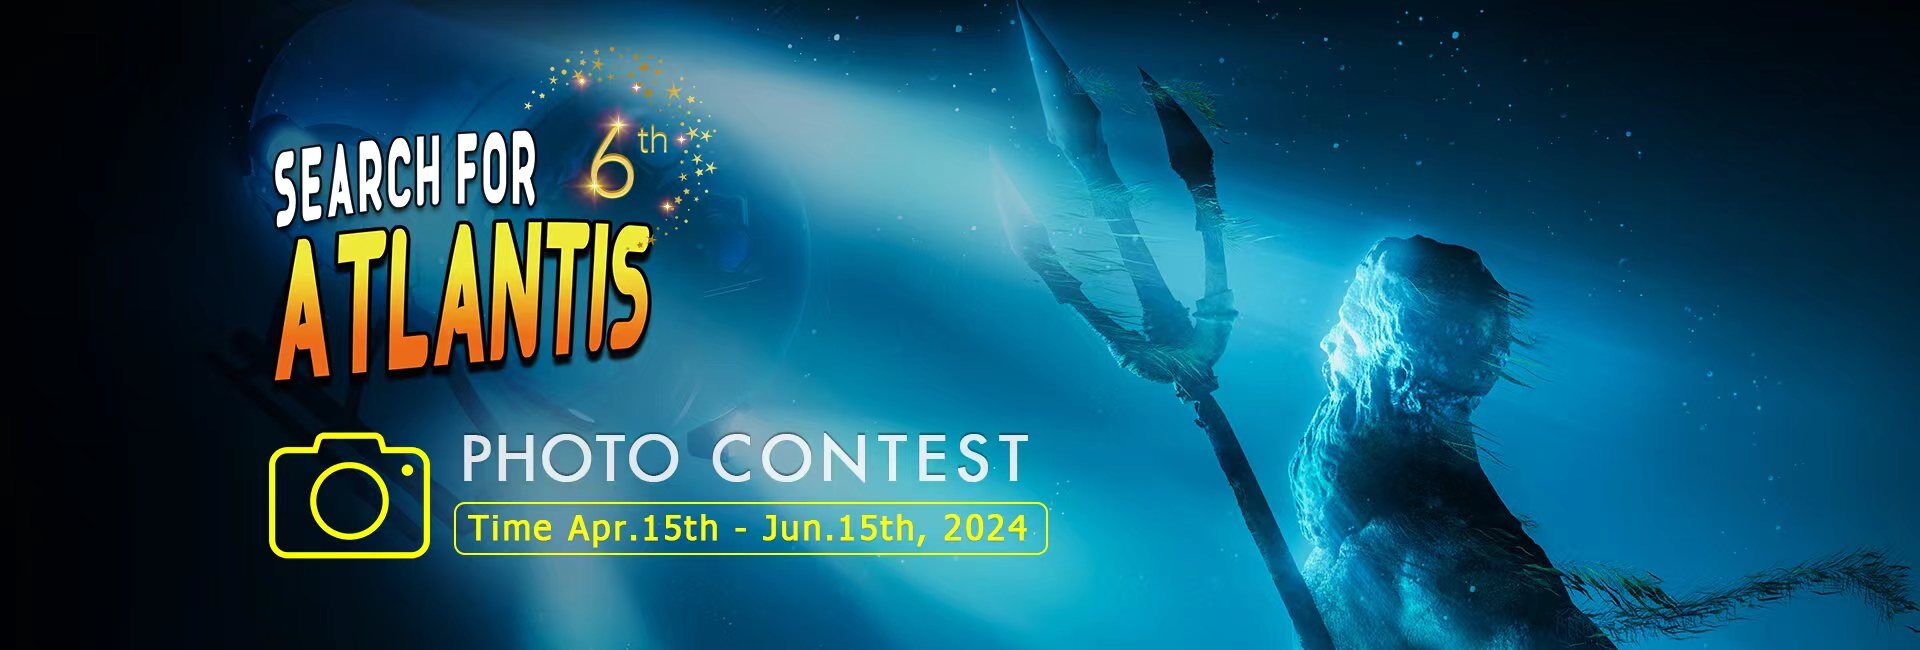 OrcaTorch 6th Search for Atlantis Photo Contest